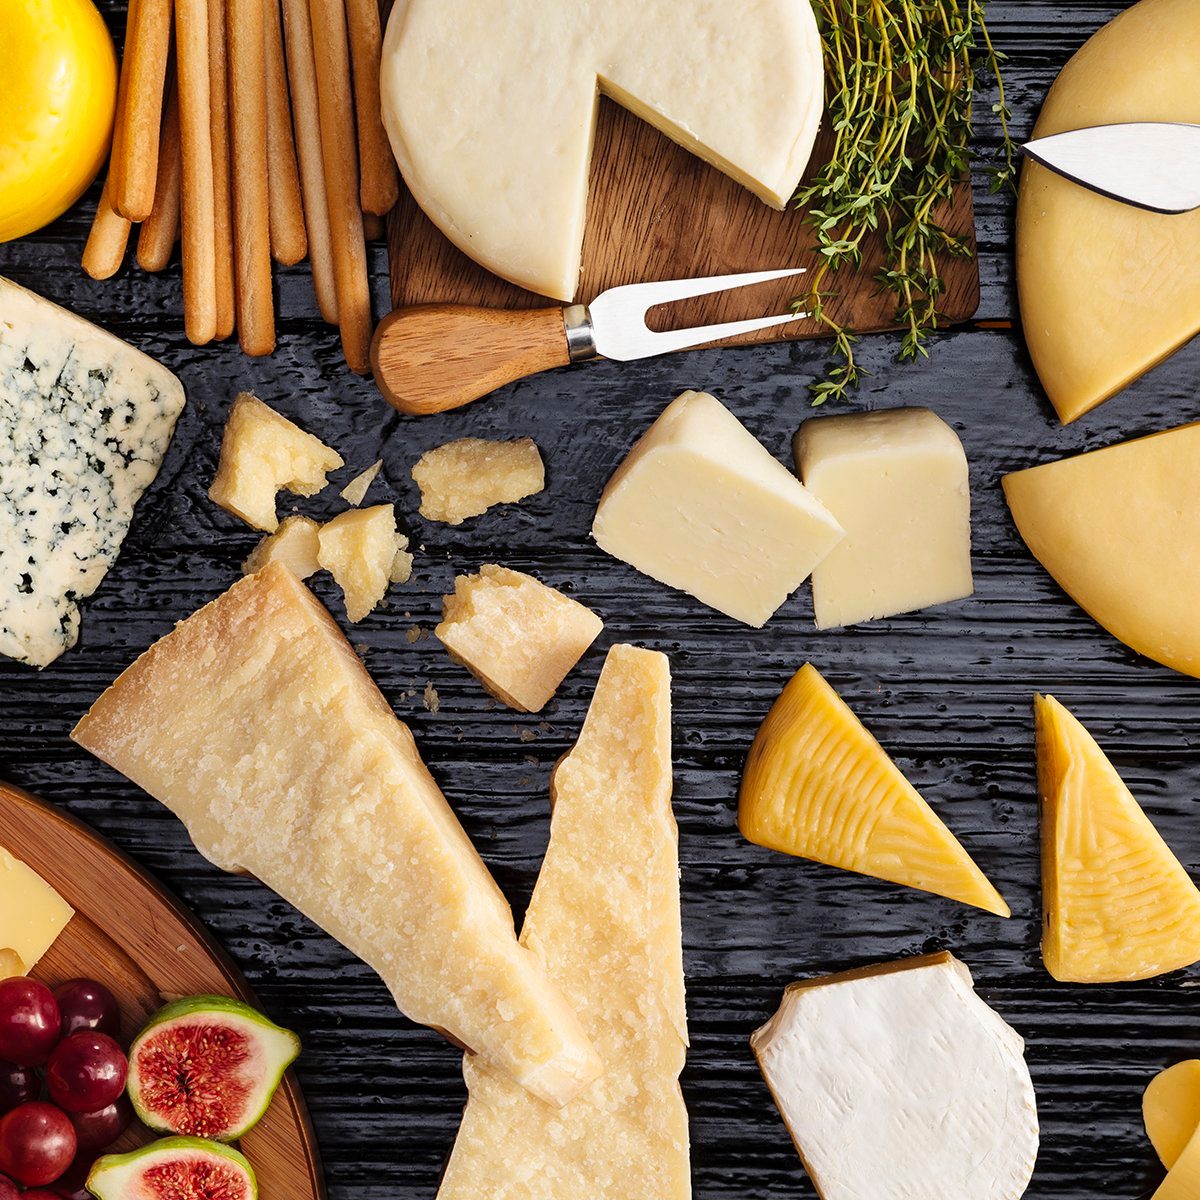 Top view of a dark table filled with a wide variety of cheeses.